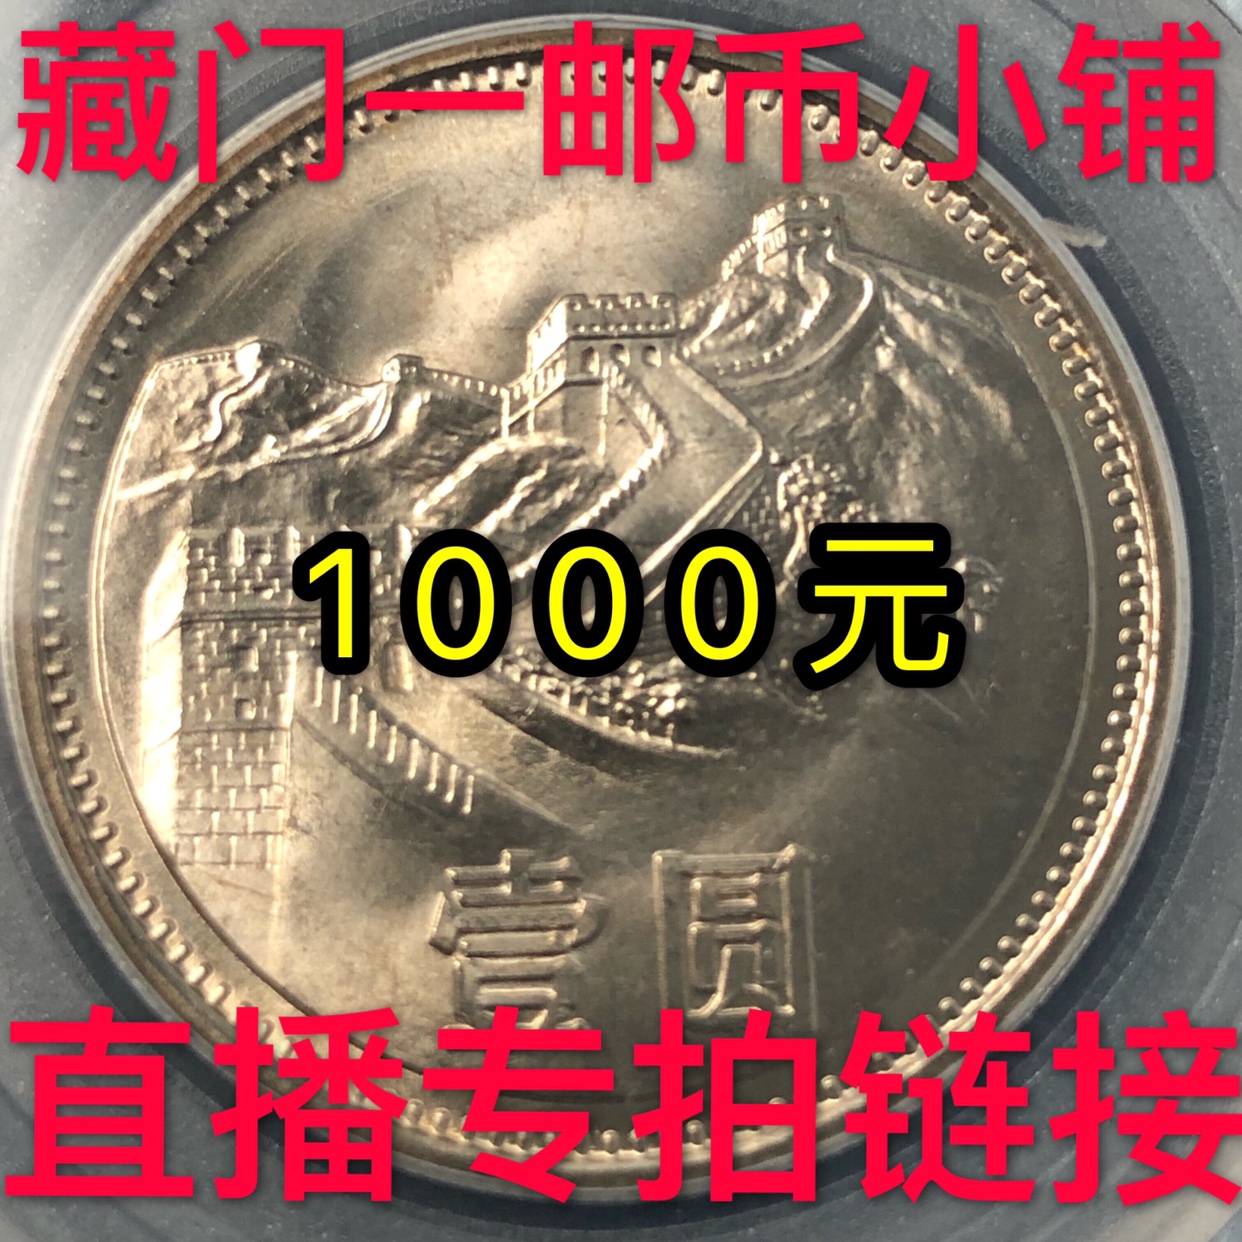 Live special shot link 1000 yuan(private shot invalid)